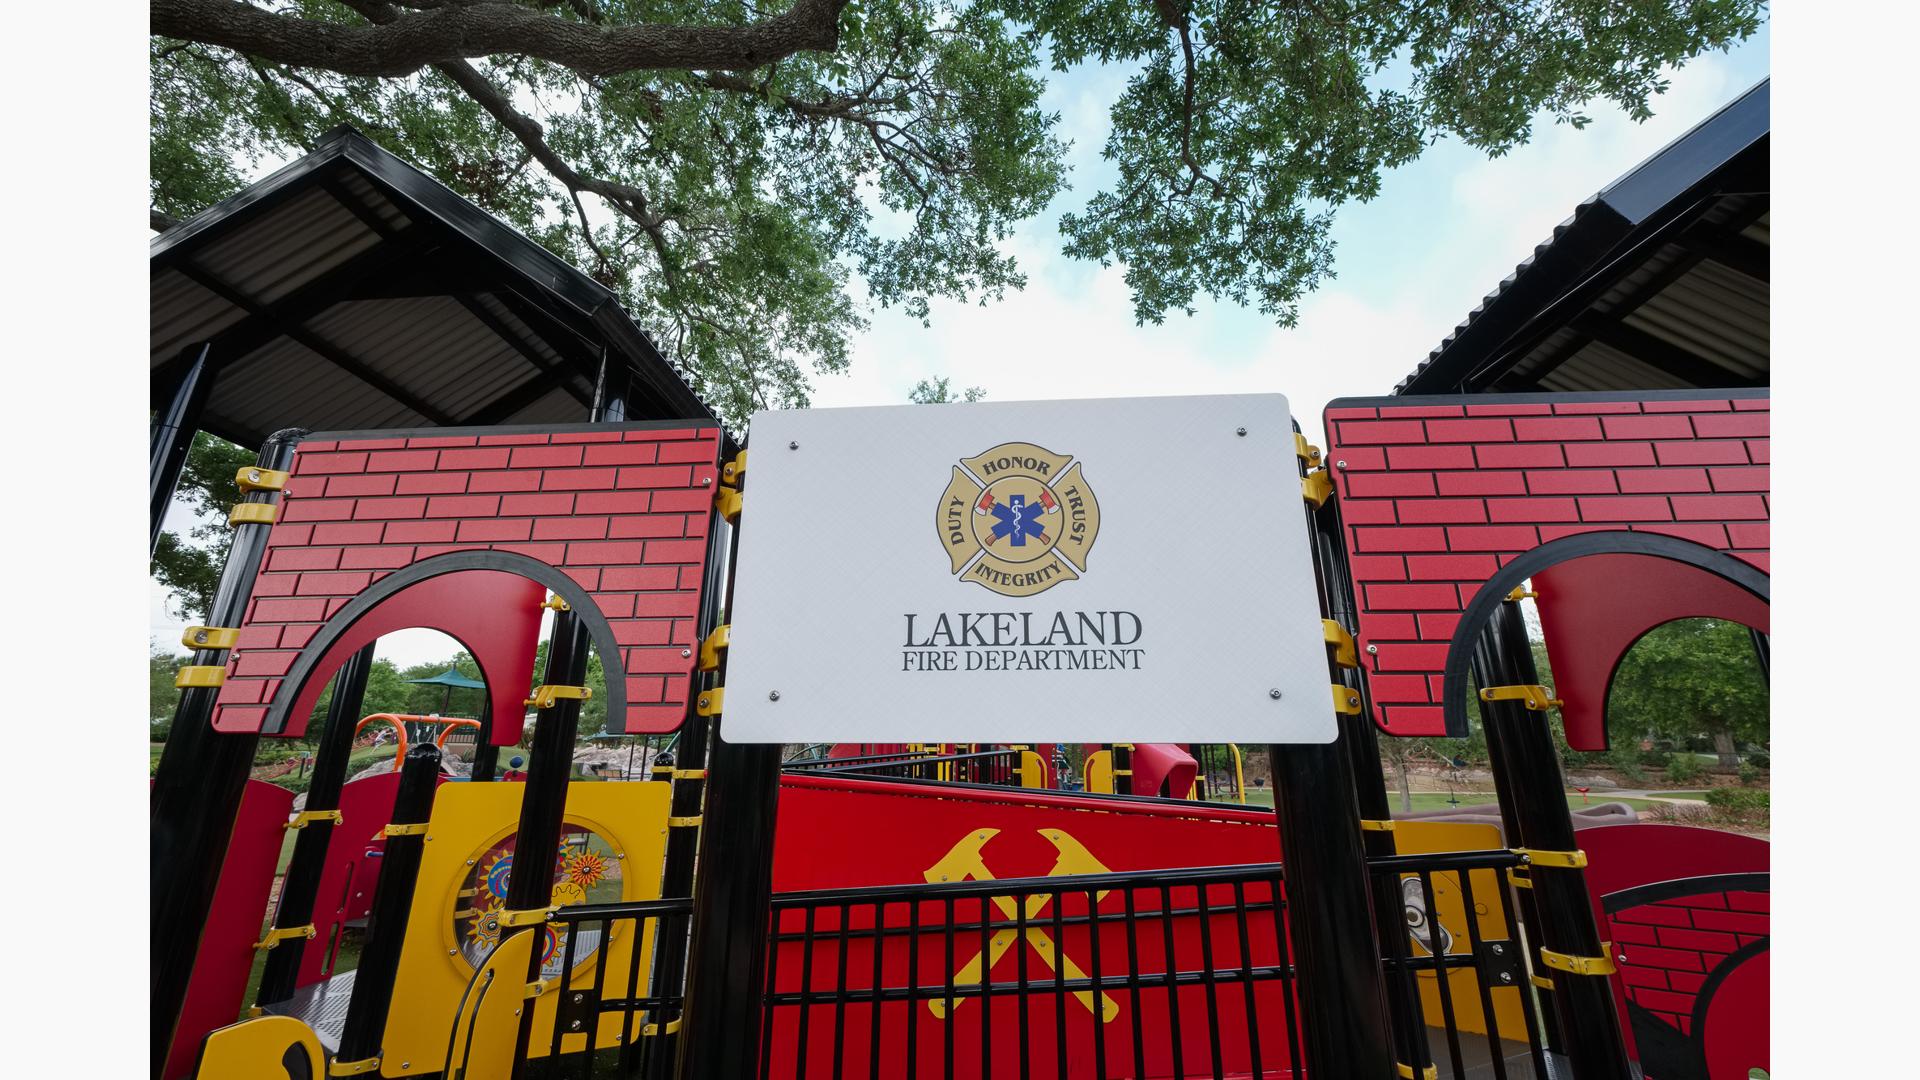 Detail of Lakeland Fire Department sign on play structure